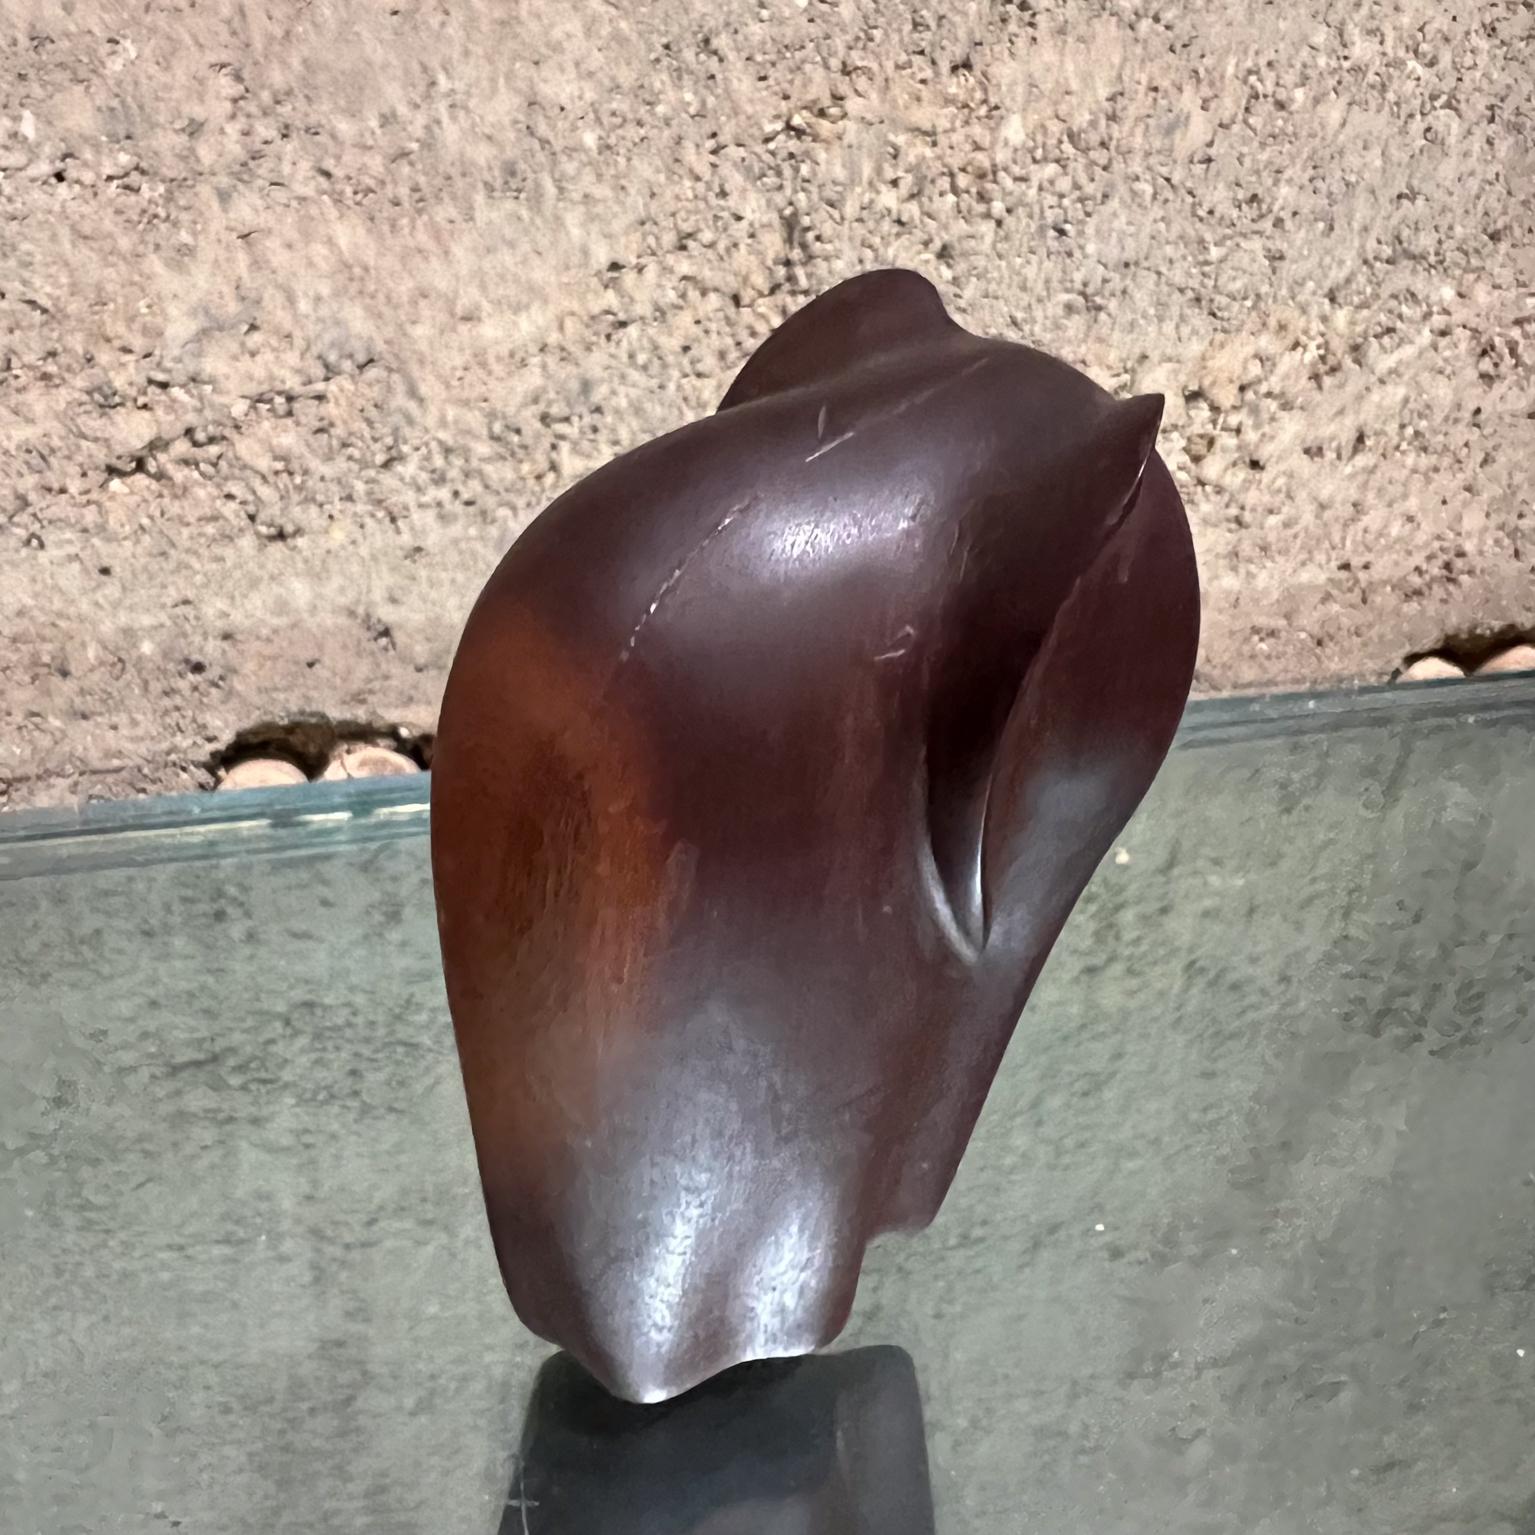 1970s Modernist Mini Elephant Sculpture Wood In Good Condition For Sale In Chula Vista, CA